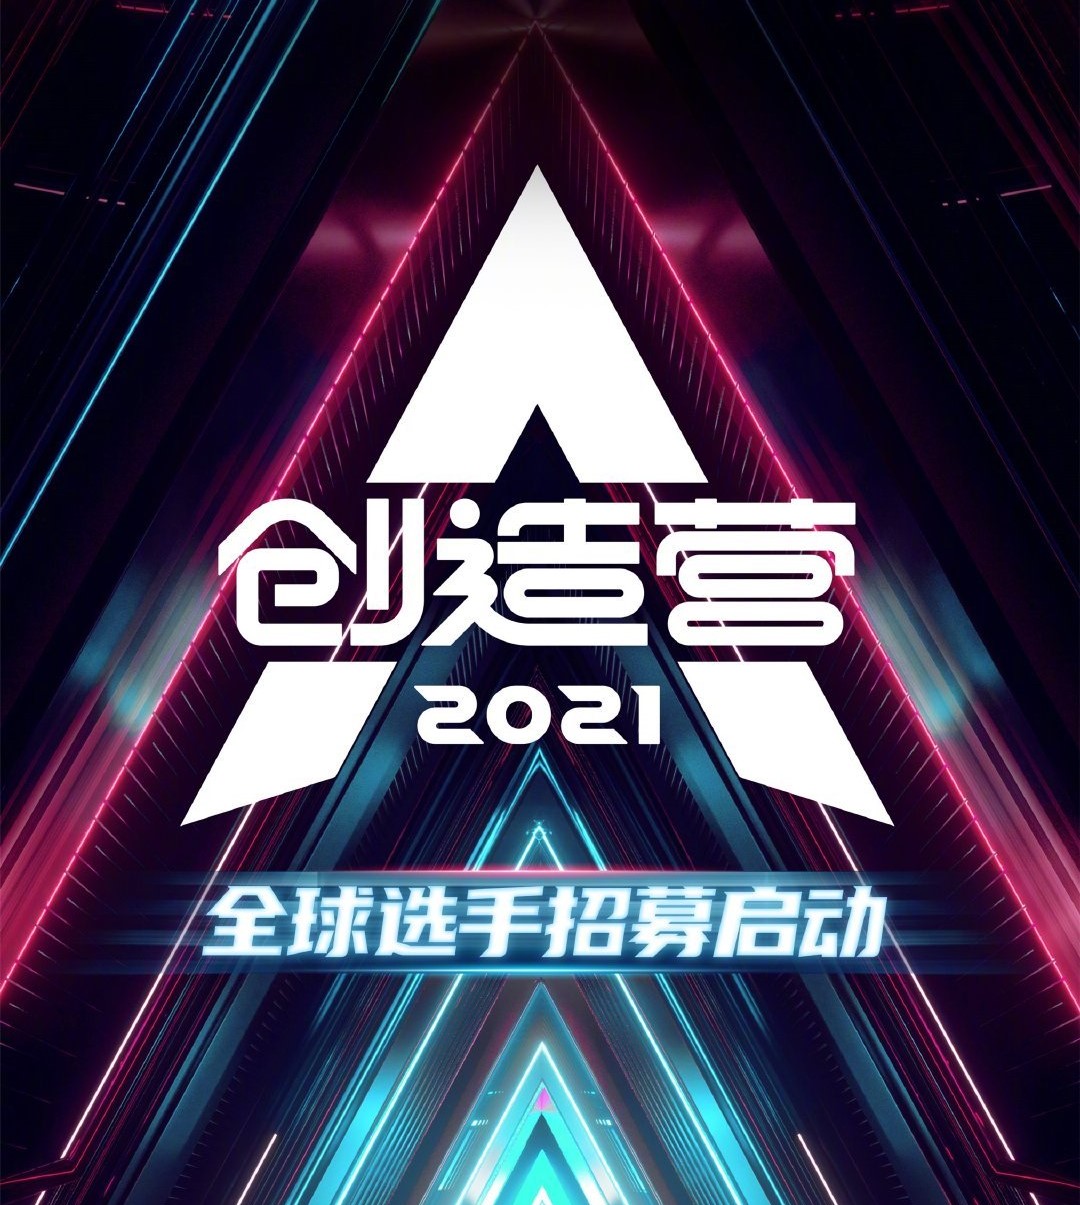 " achieve 4 " the 3rd round of perform in public learns elder sister road to reflect exposure fully, ju Jing  Dai  is too bright eye, ground connection enrages Meng Meiqi